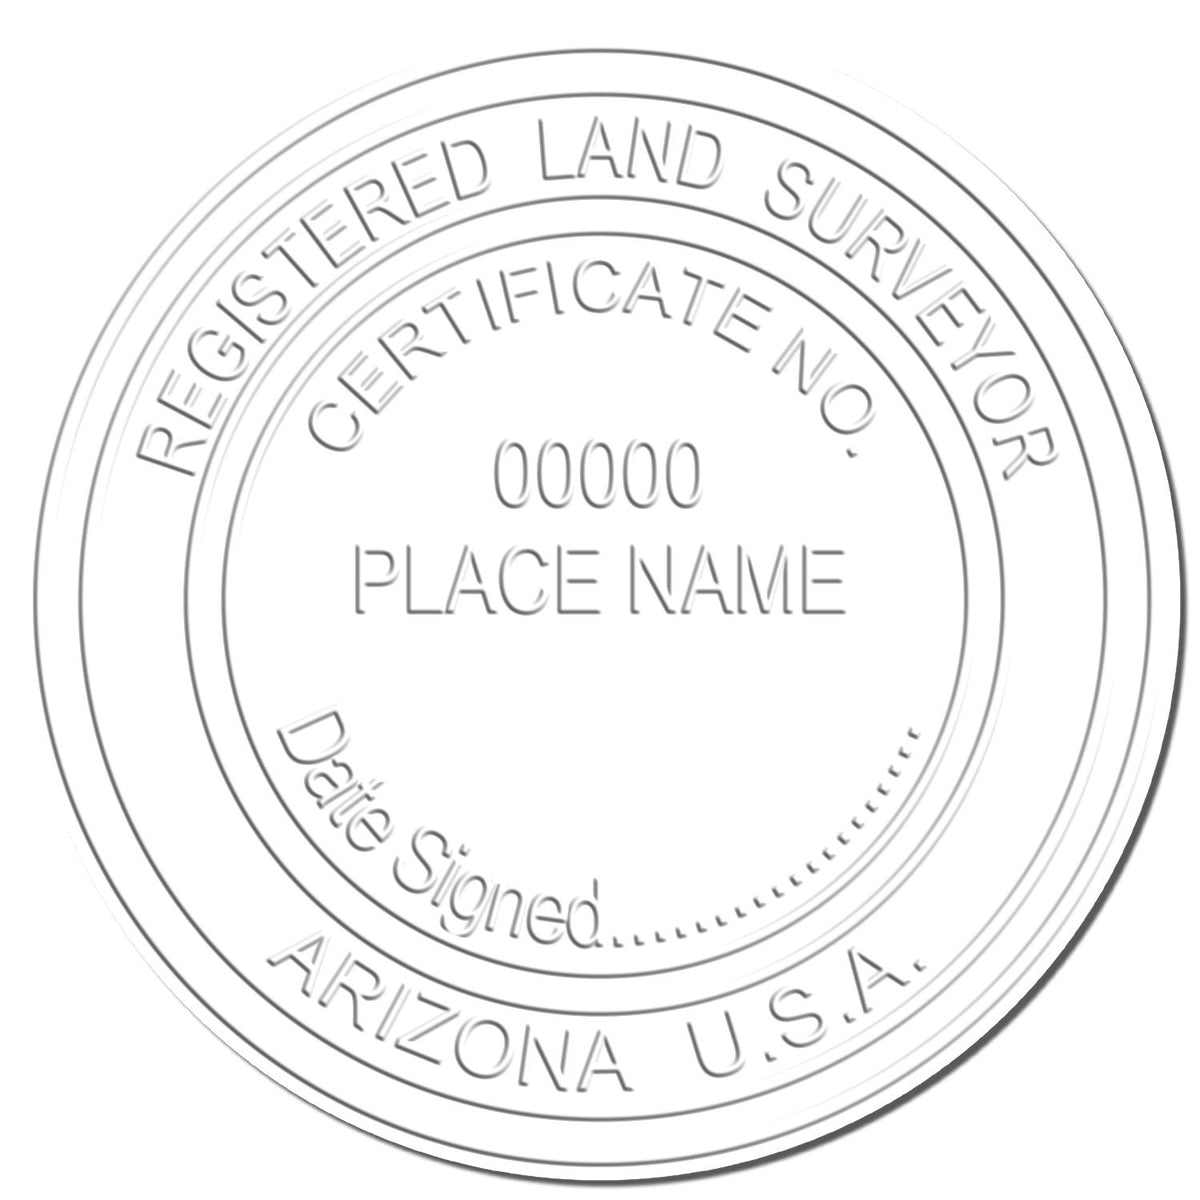 This paper is stamped with a sample imprint of the Long Reach Arizona Land Surveyor Seal, signifying its quality and reliability.